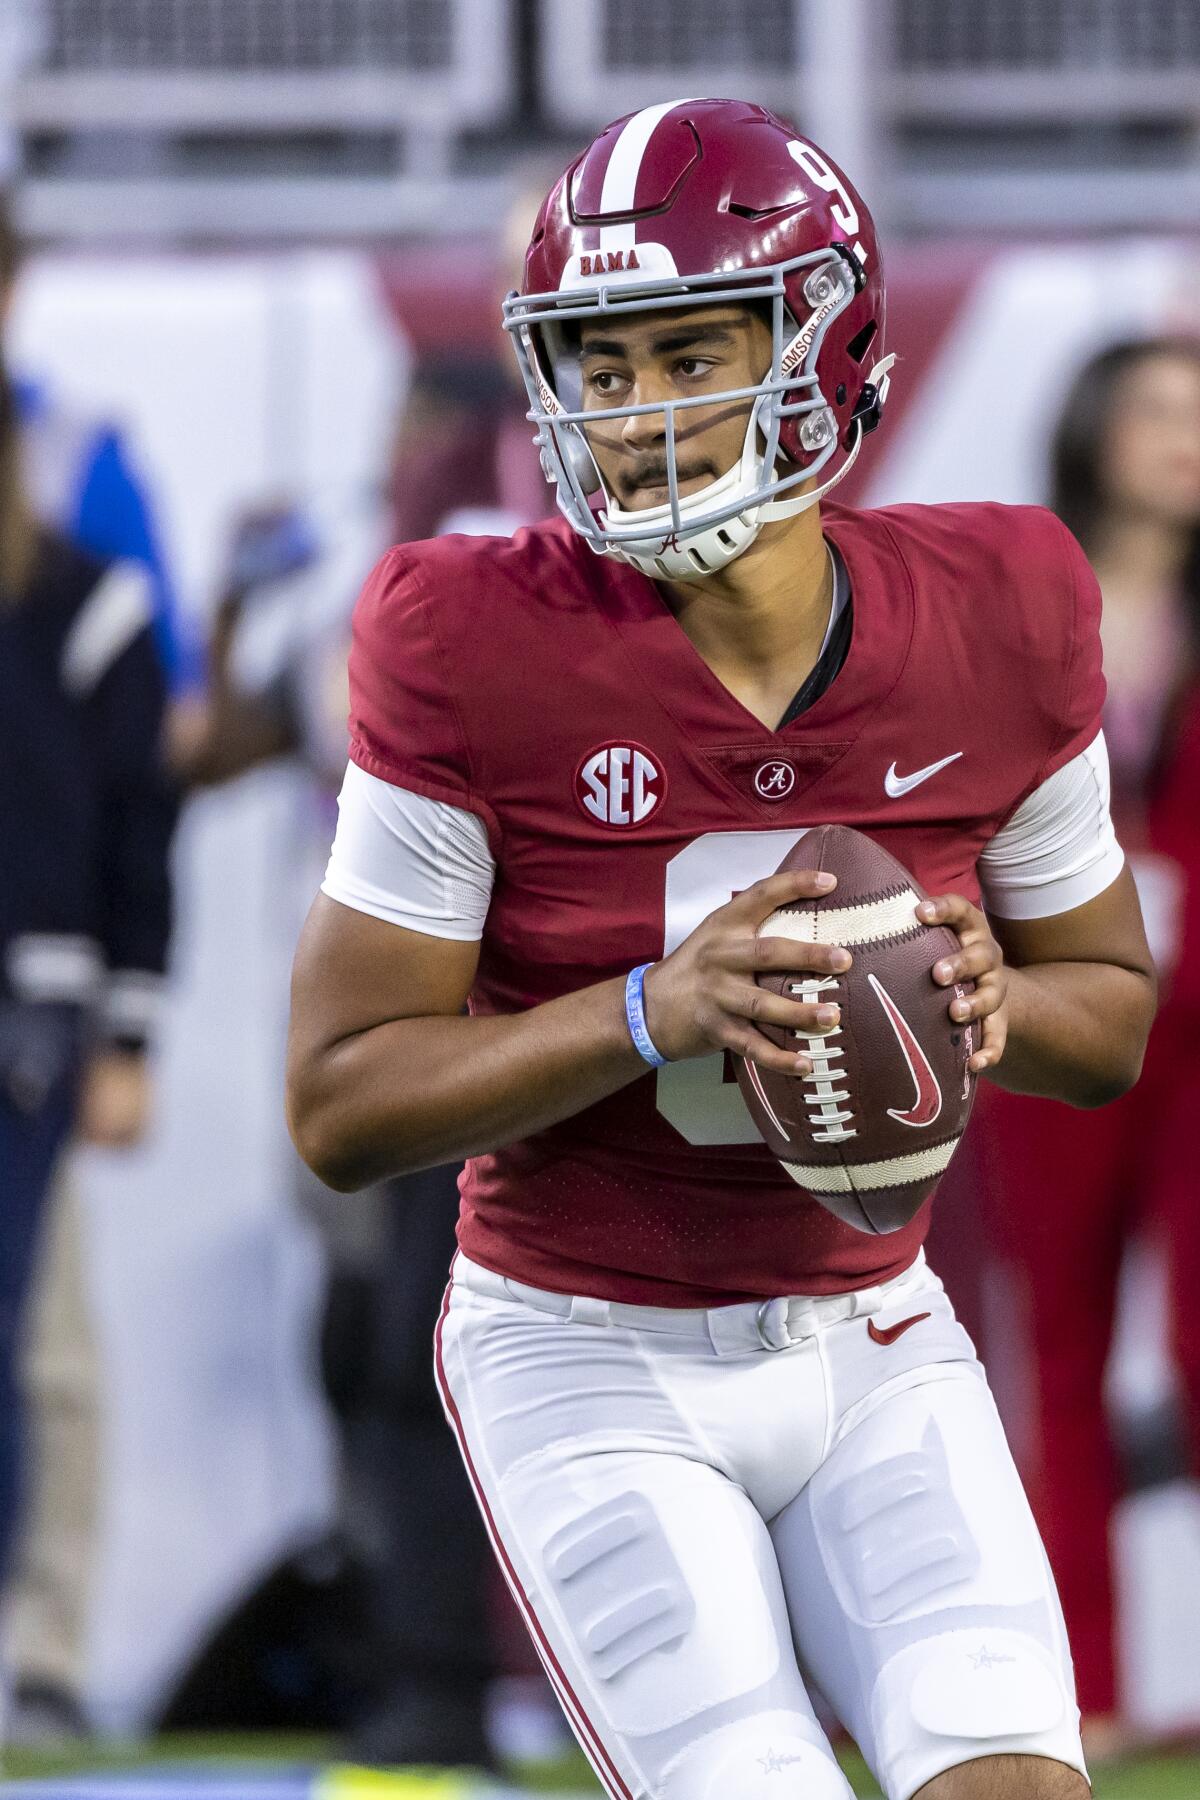 Alabama quarterback Bryce Young warms up before an NCAA college football game against Texas A&M, Saturday, Oct. 8, 2022, in Tuscaloosa, Ala. (AP Photo/Vasha Hunt)